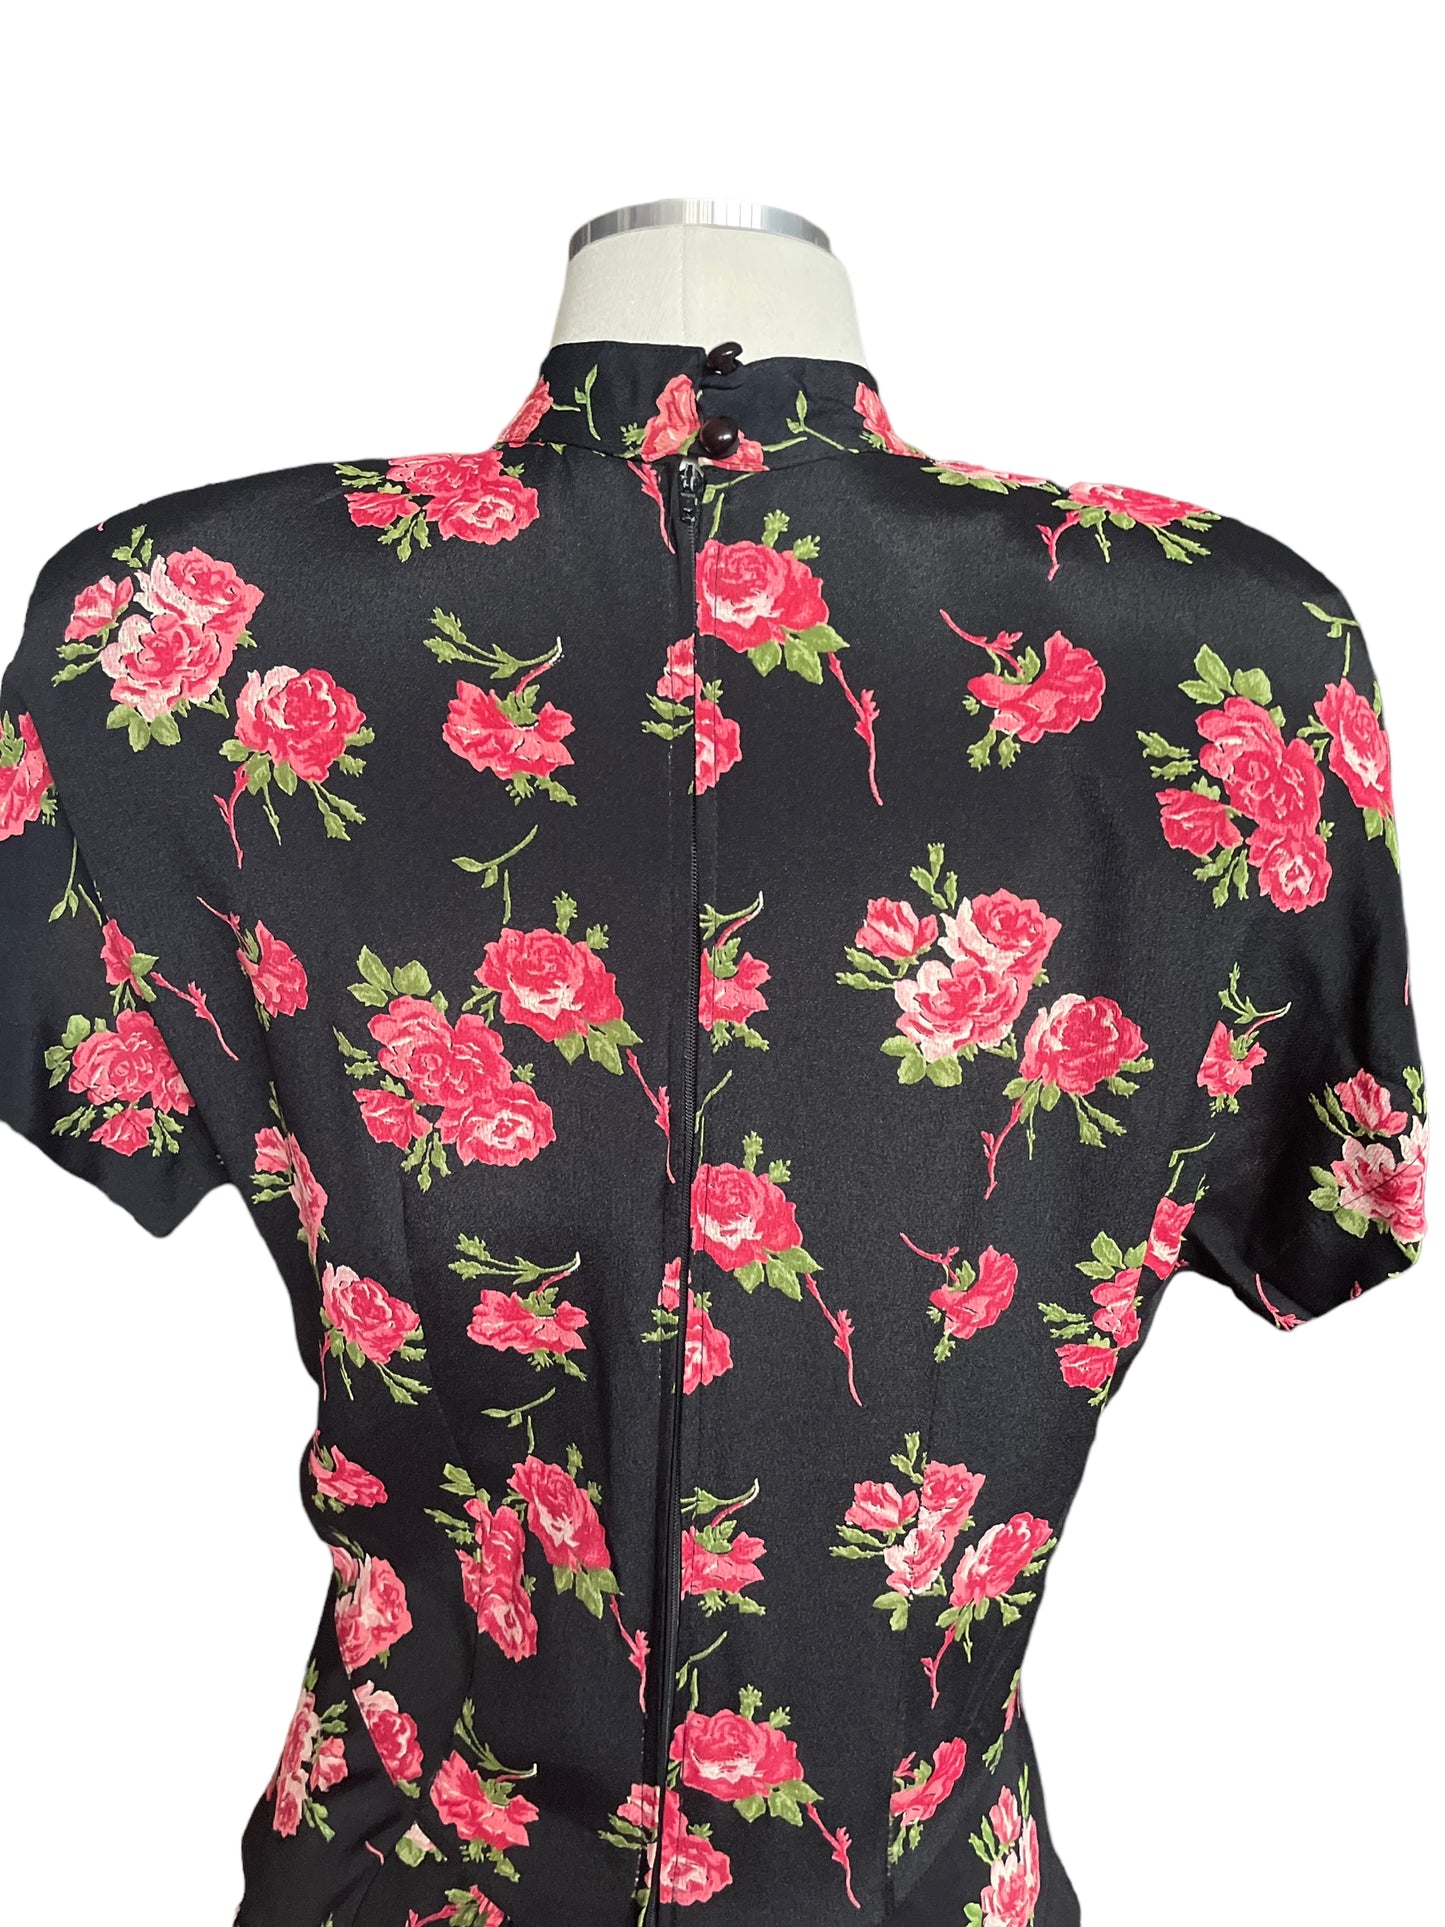 Upper back view of Vintage 80s Does 40s Roses Dress | Seattle Vintage Dresses | Barn Owl Ladies Clothing